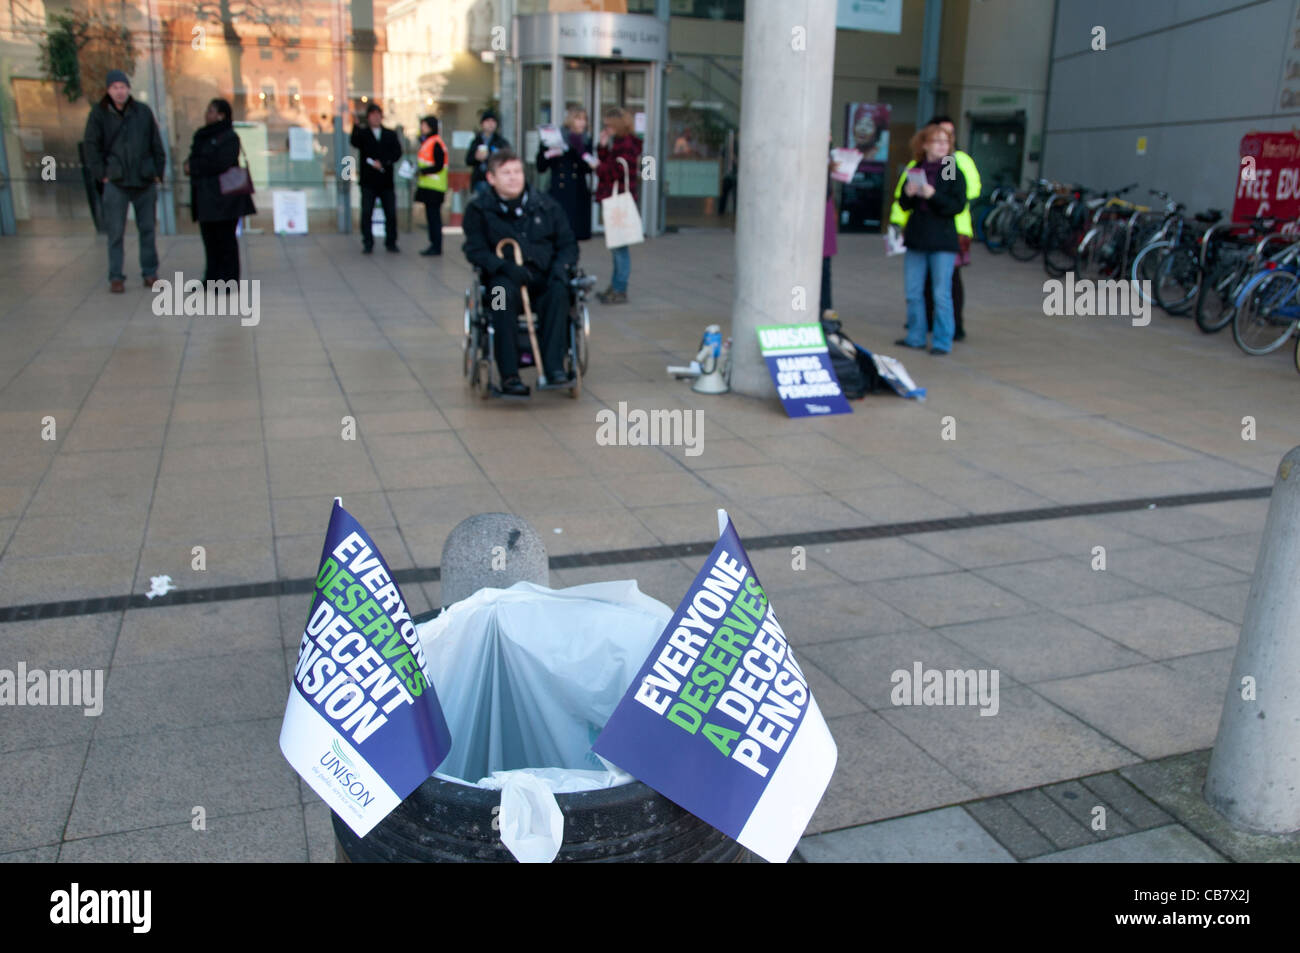 One day strike against pension cuts by public sector workers. Picket at Hackney Central library. Rubbish bin with Unison flags Stock Photo